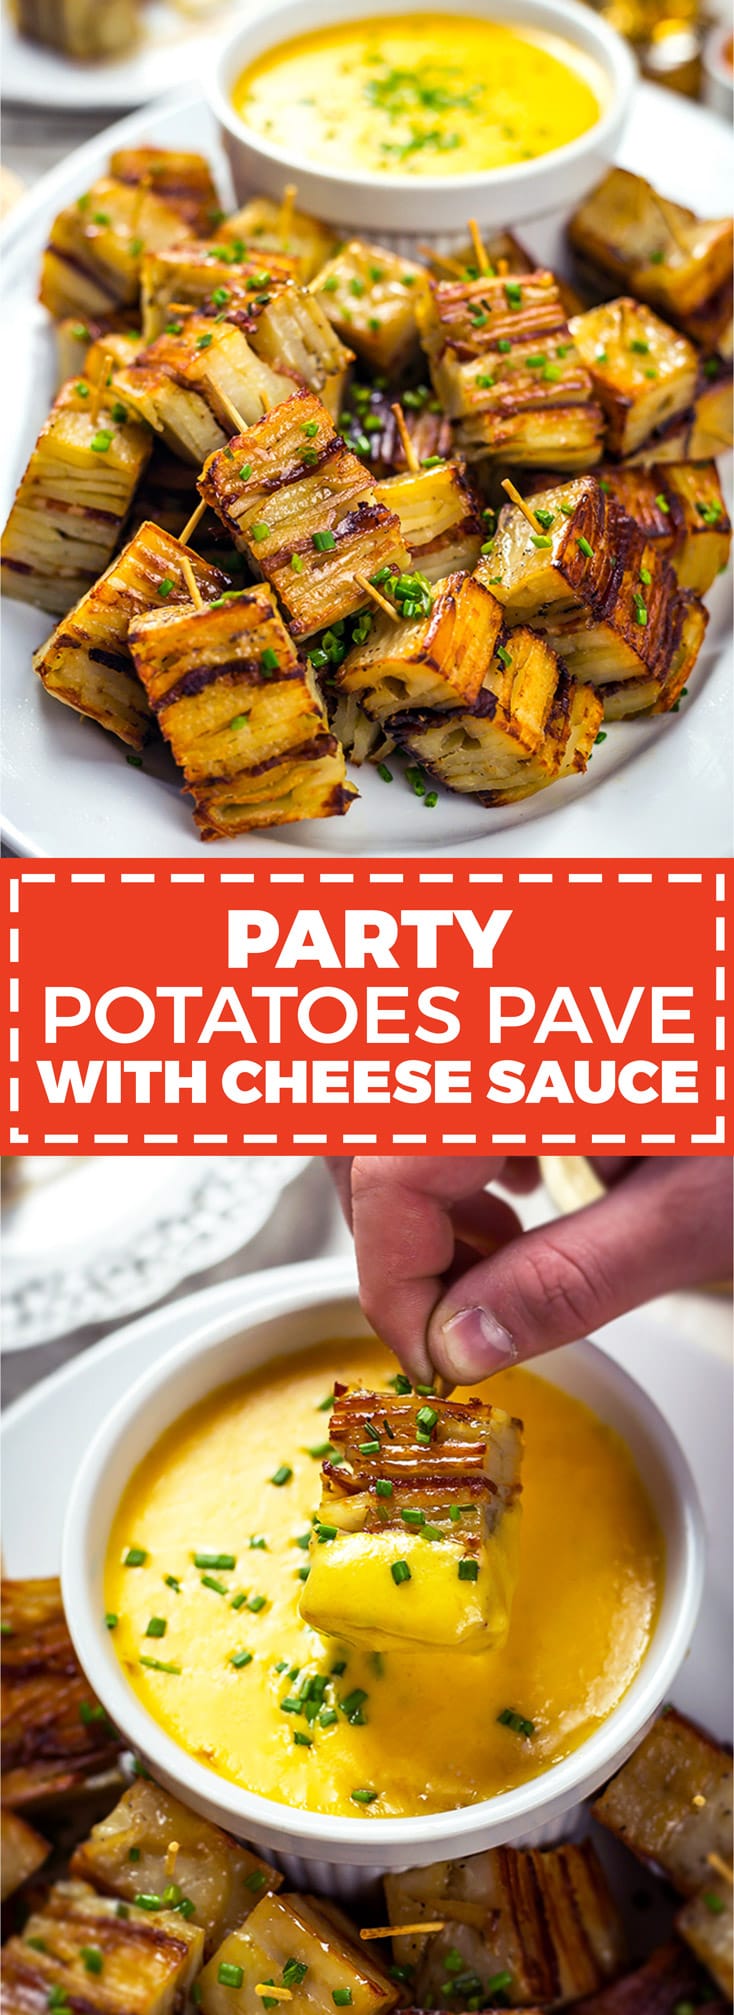 Party Potato Pave Bites with Cheese Sauce. Layered potatoes, bacon, and a creamy cheese sauce make this recipe a hit with a crowd! | hostthetoast.com